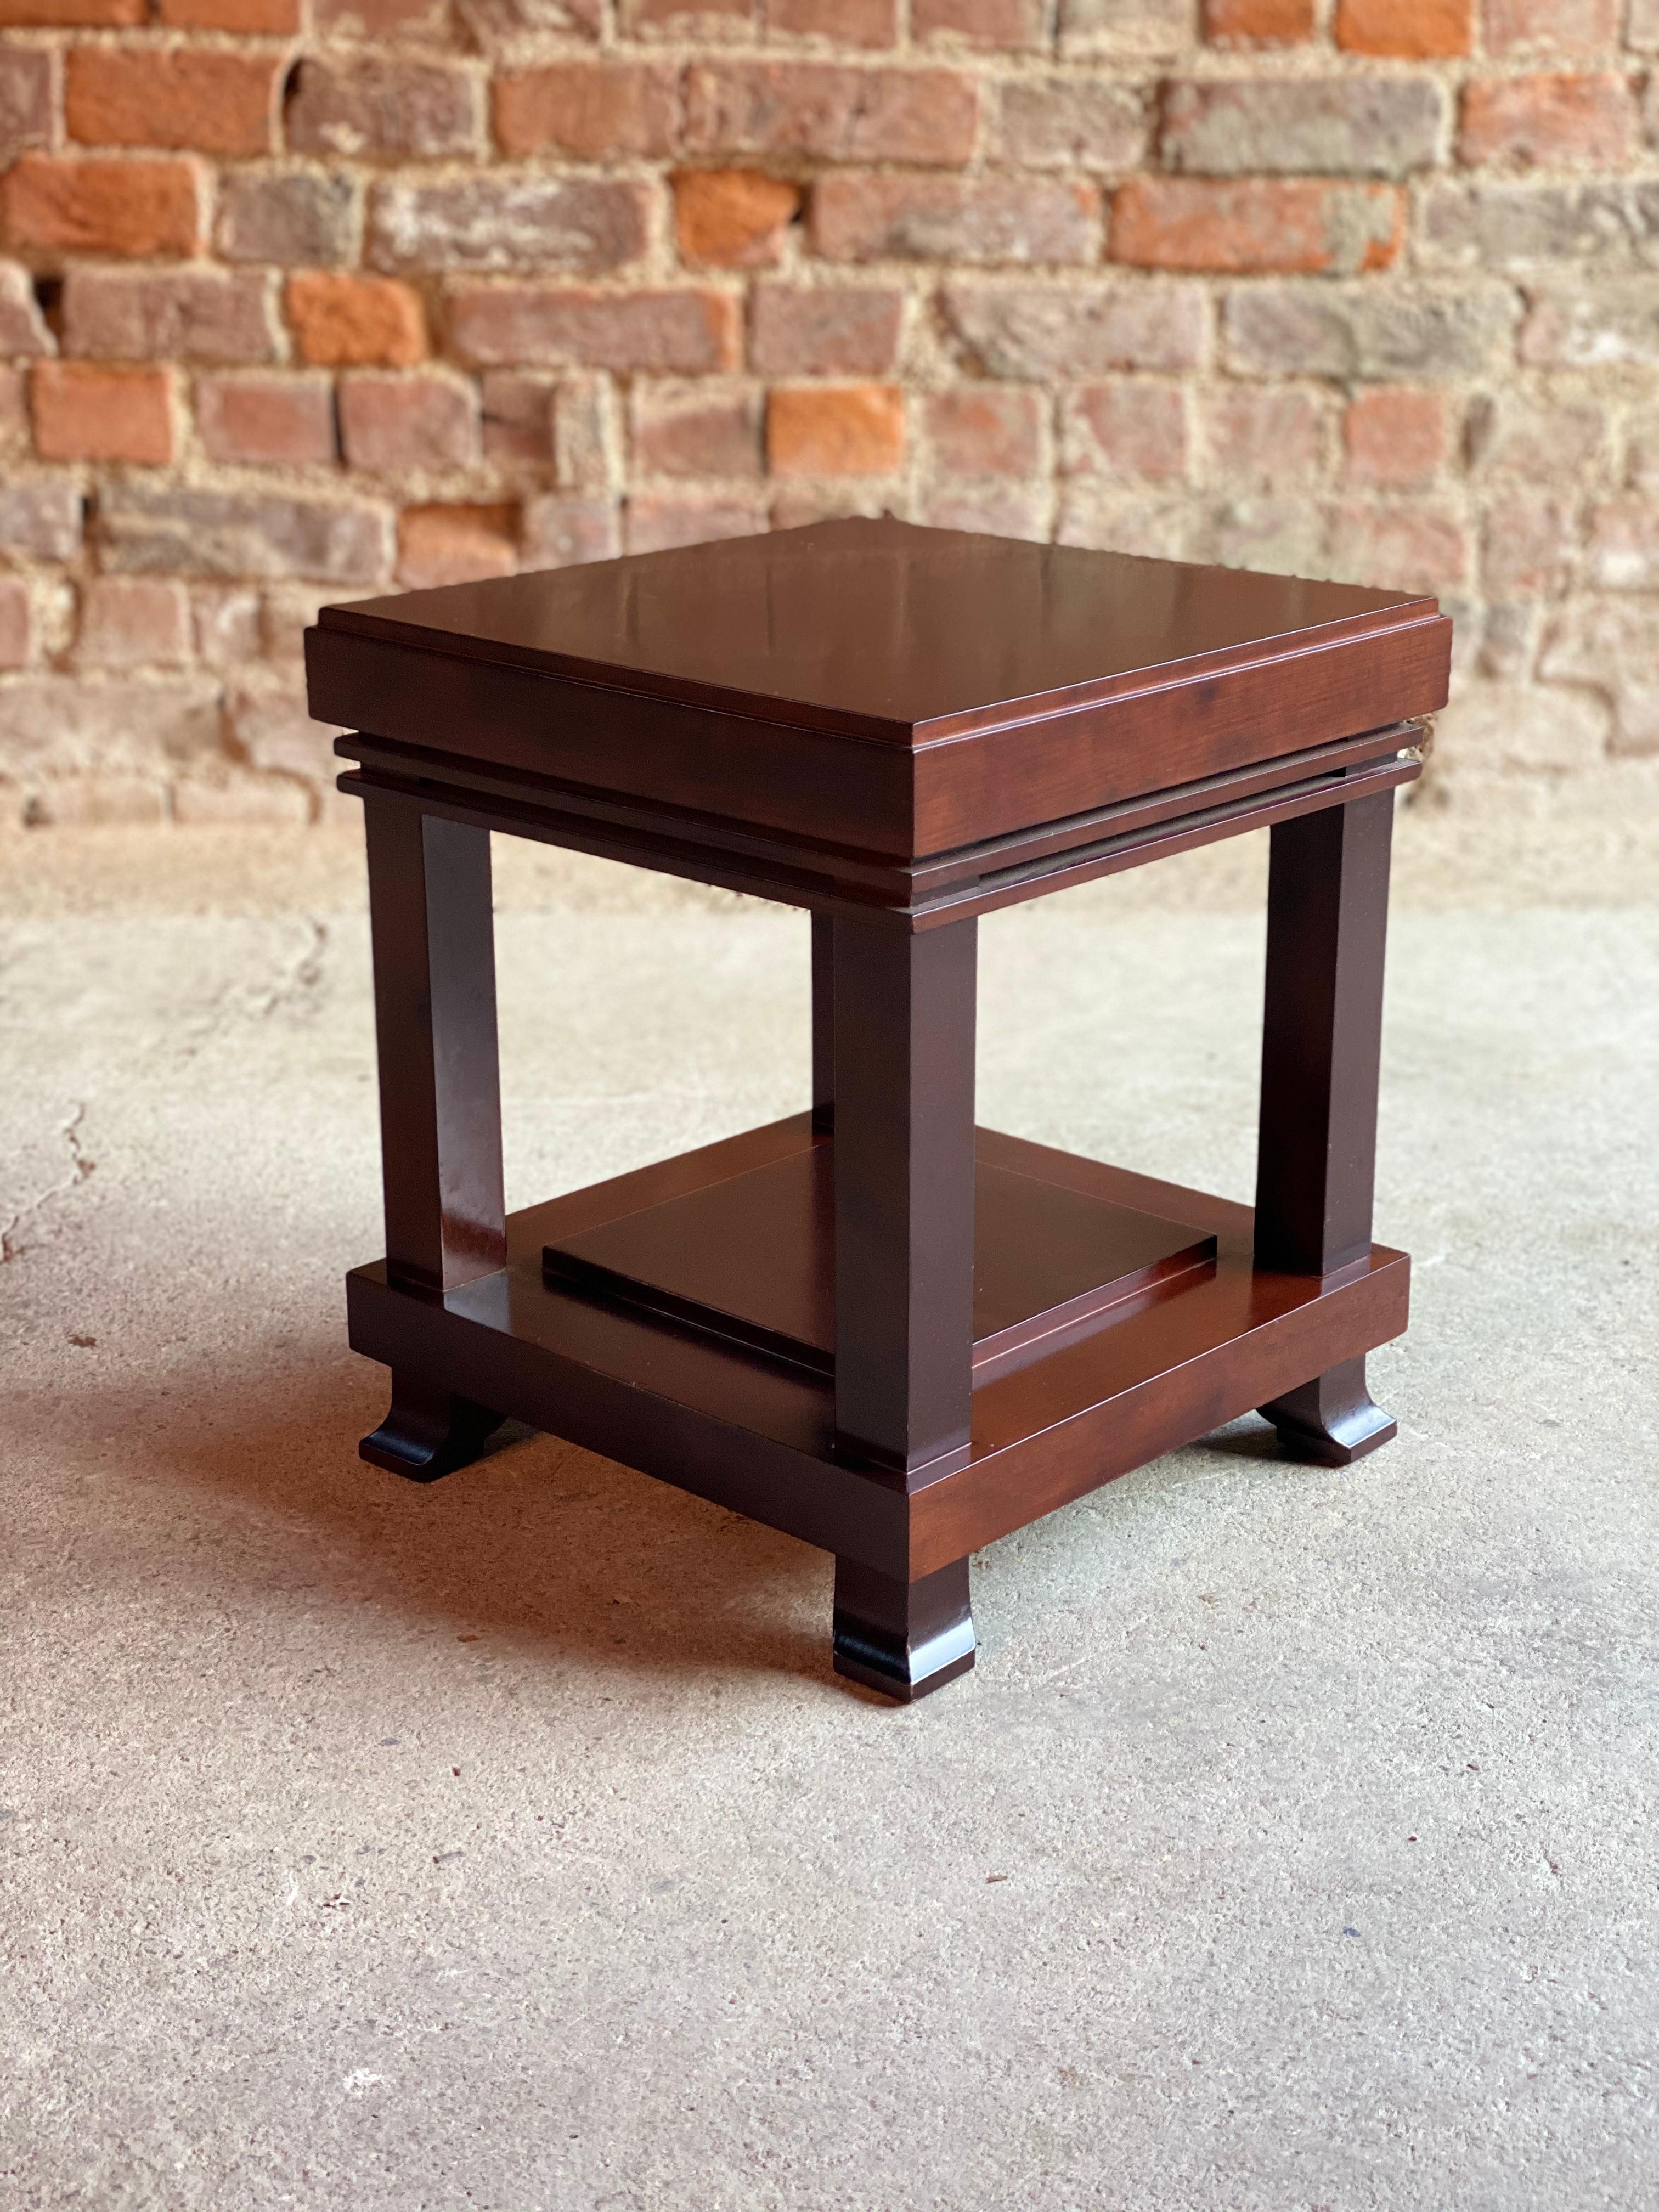 Cherry Frank Lloyd Wright ‘Robie’ Side Tables or Stools Manufactured by Cassina